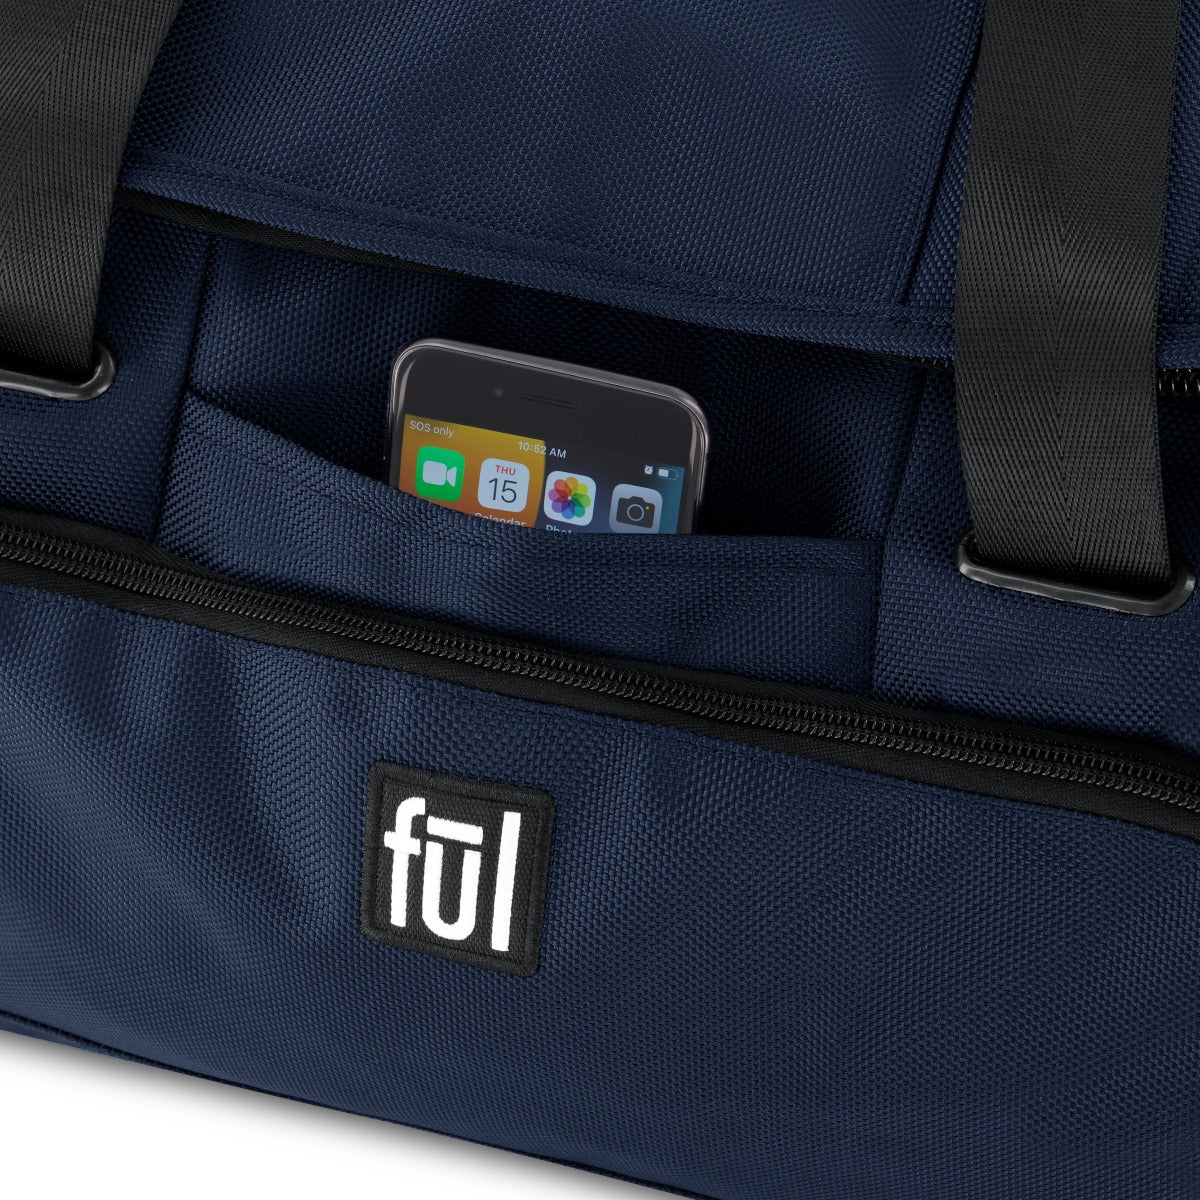 ful tactics collection siege duffle bag navy blue - best duffle bags for the gym